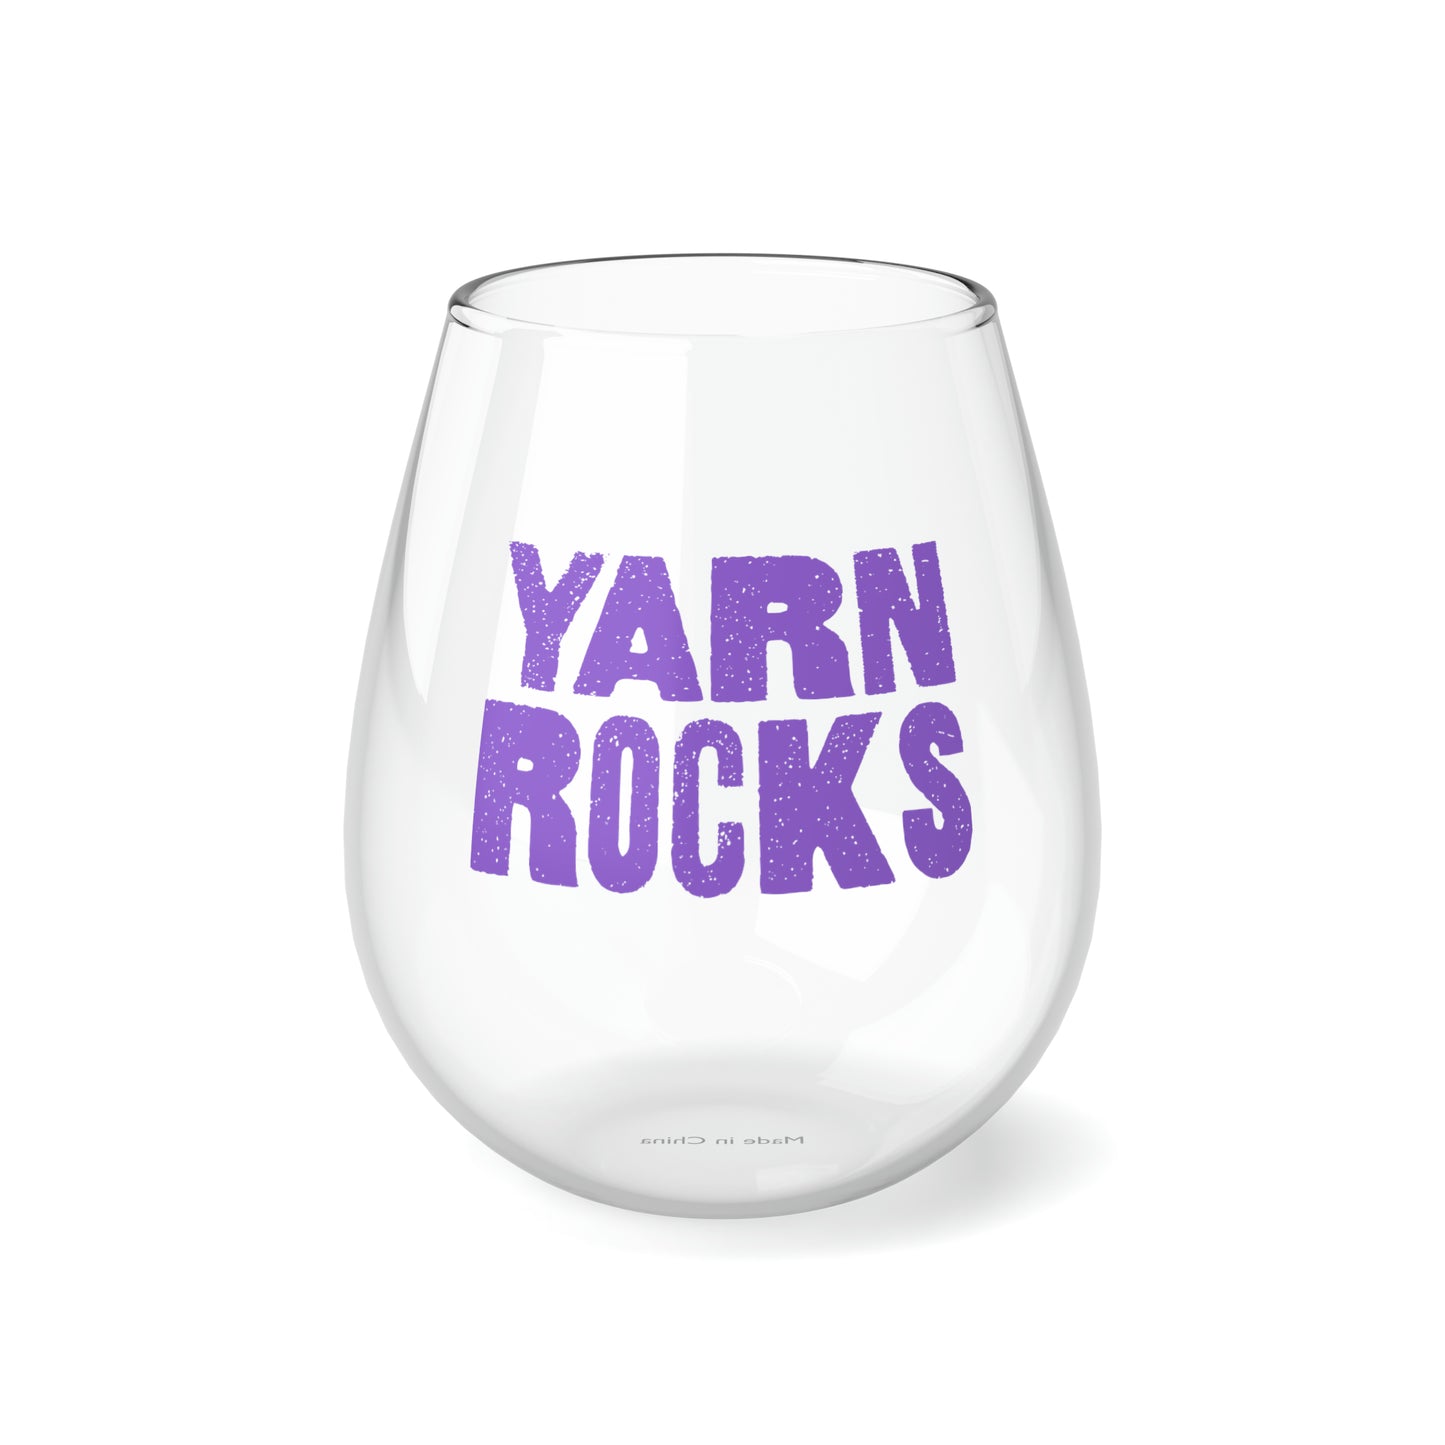 YARN ROCKS Stemless Wine Glass - 15+ Colors Or Customize It!